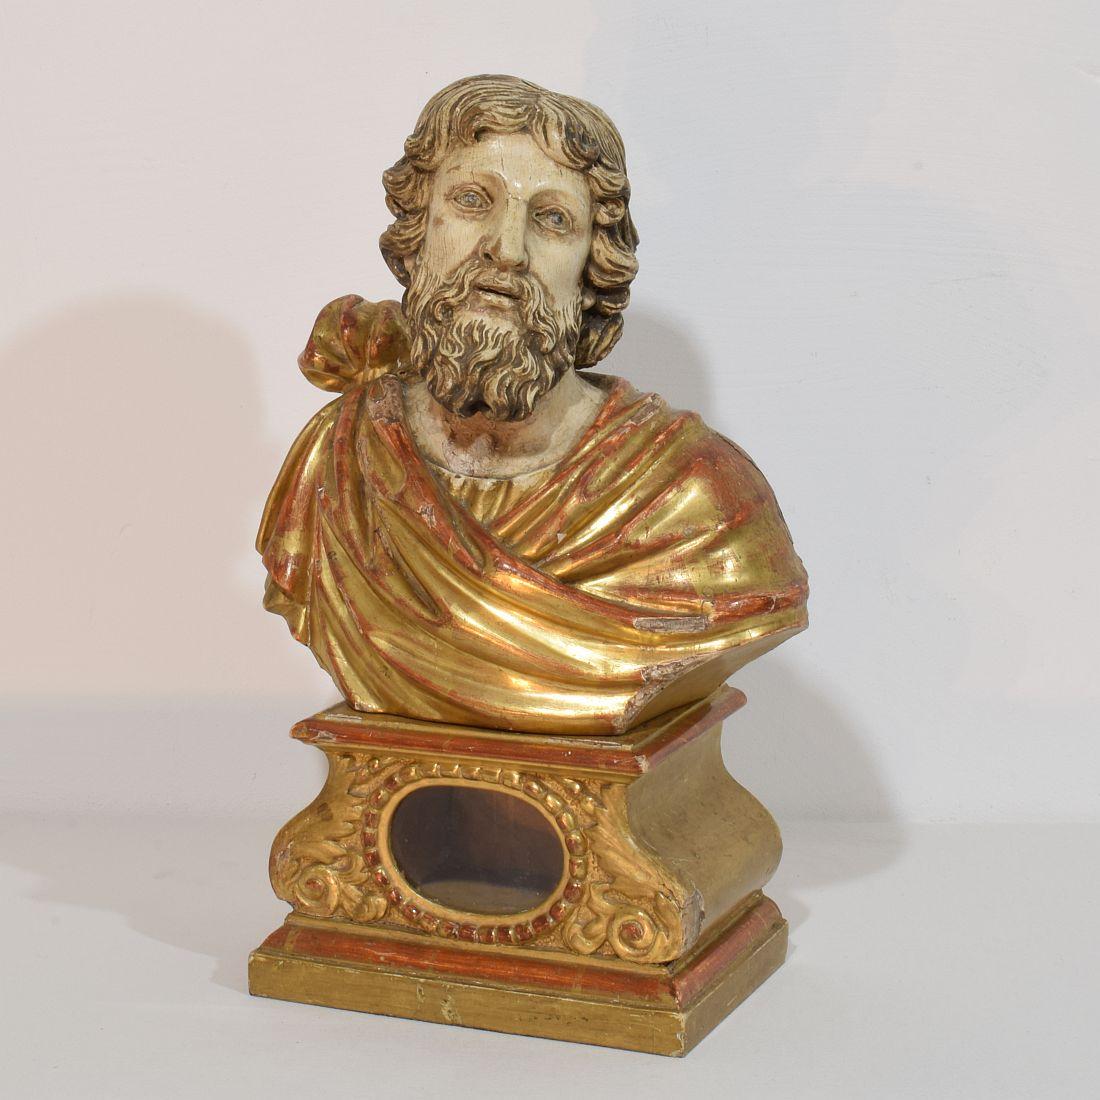 Spectacular and very decorative piece. Large hand carved wooden reliquary bust of a saint. Beautiful weathered color and gilding. Small losses/Old repairs and without the relics. Italy circa 1650-1750. 
Much more photo's available on request.